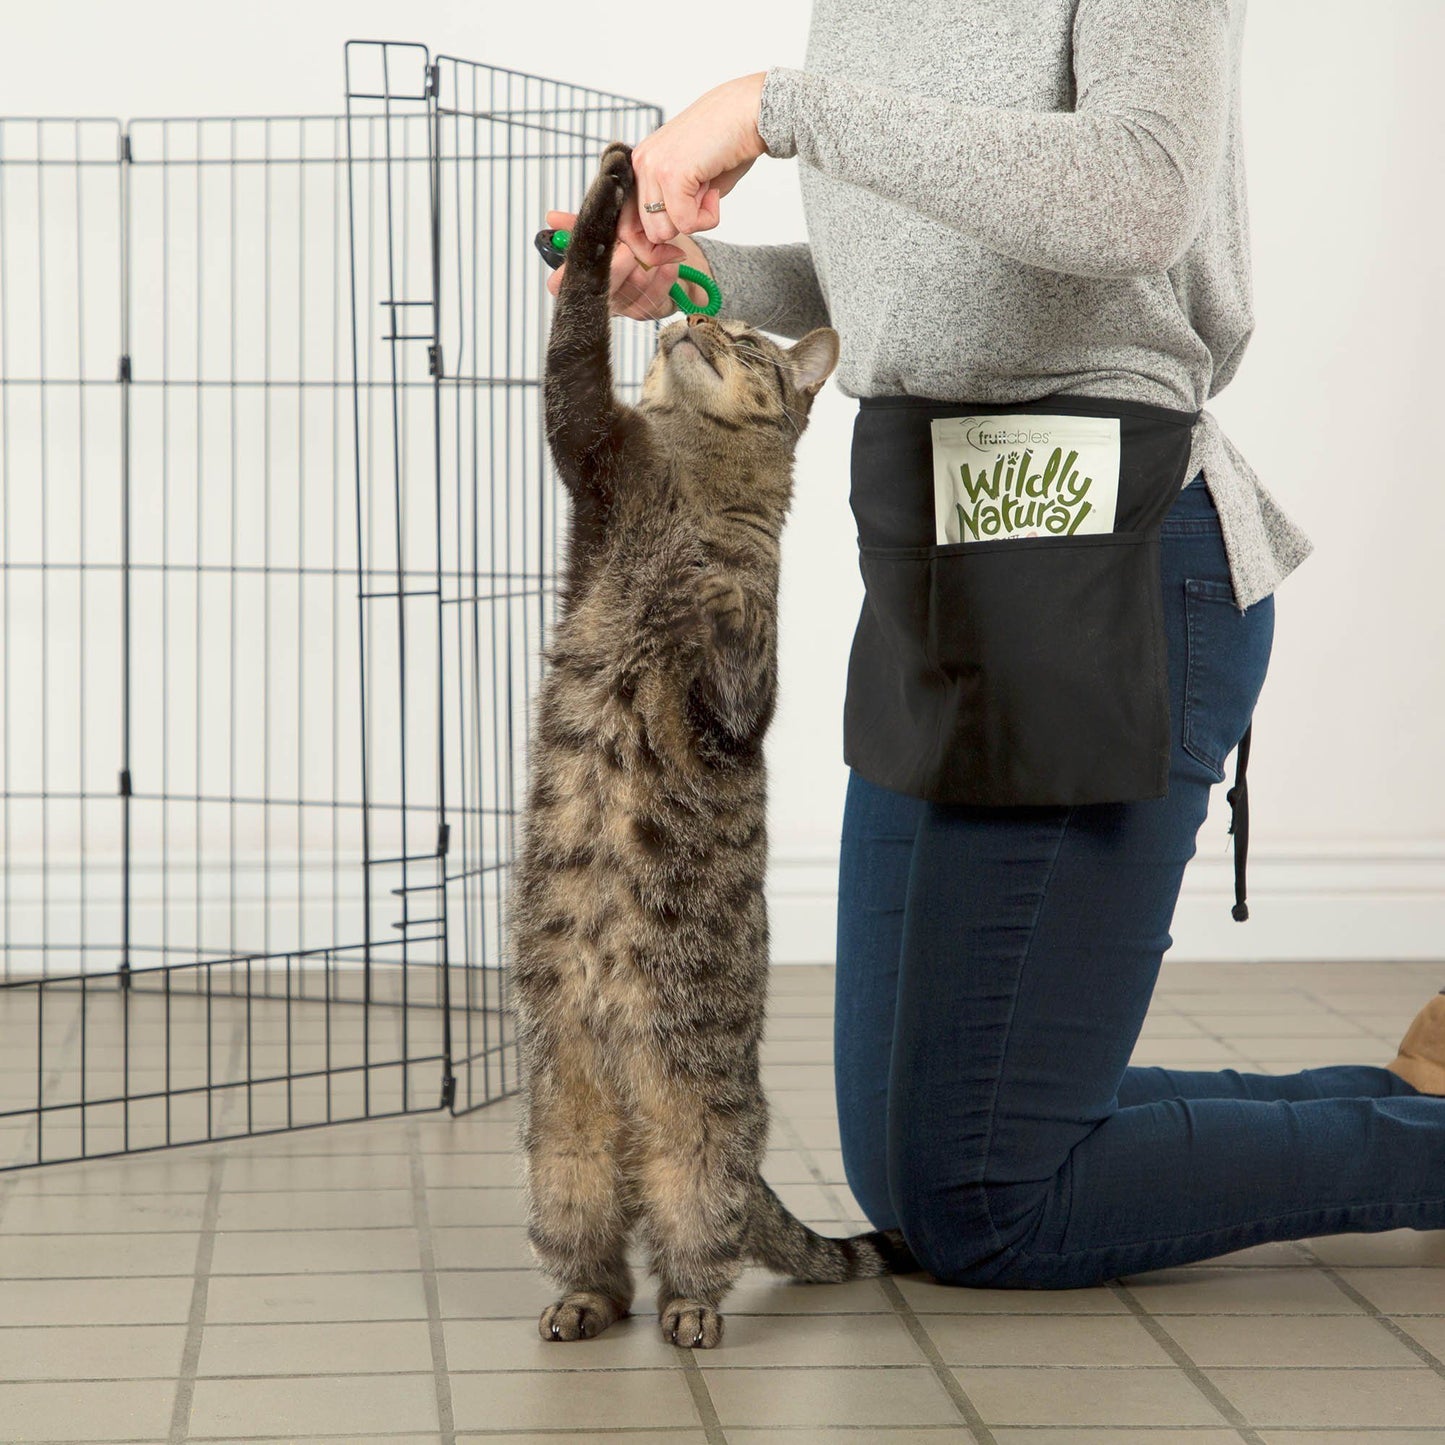 Training Packs To Help Cats & Kittens Get Adopted